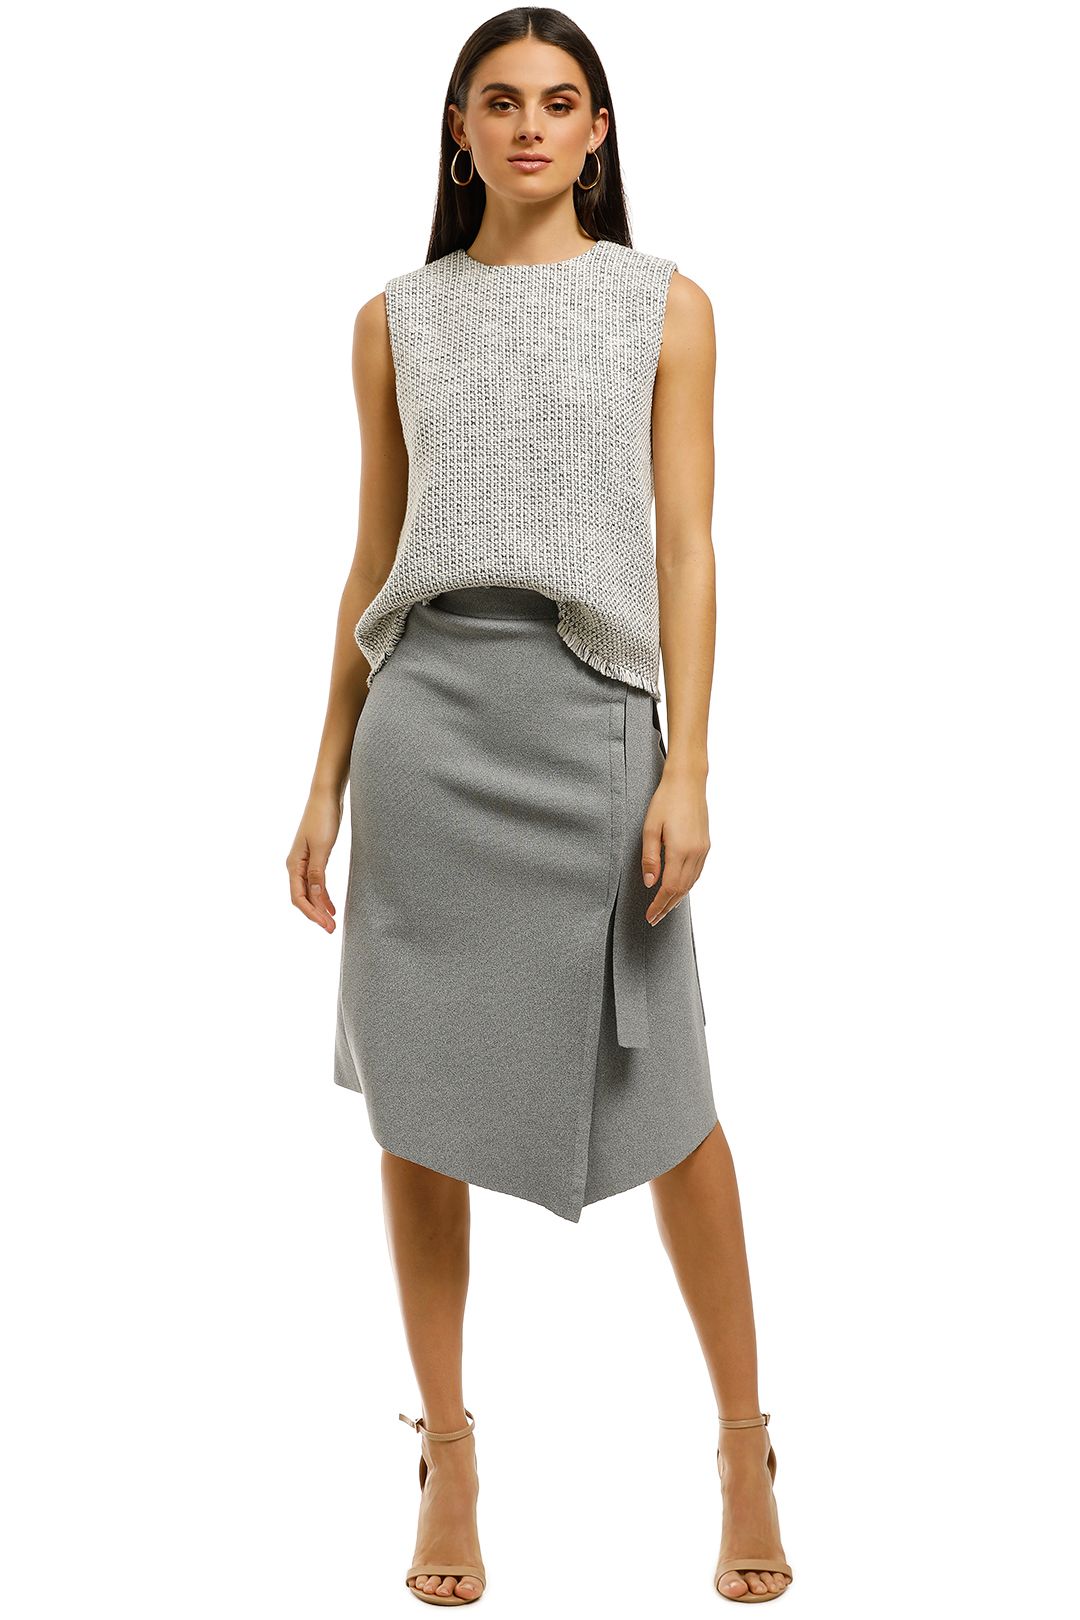 FWRD-The-Label-Alena-Crepe-Knit-Skirt-Grey-Front